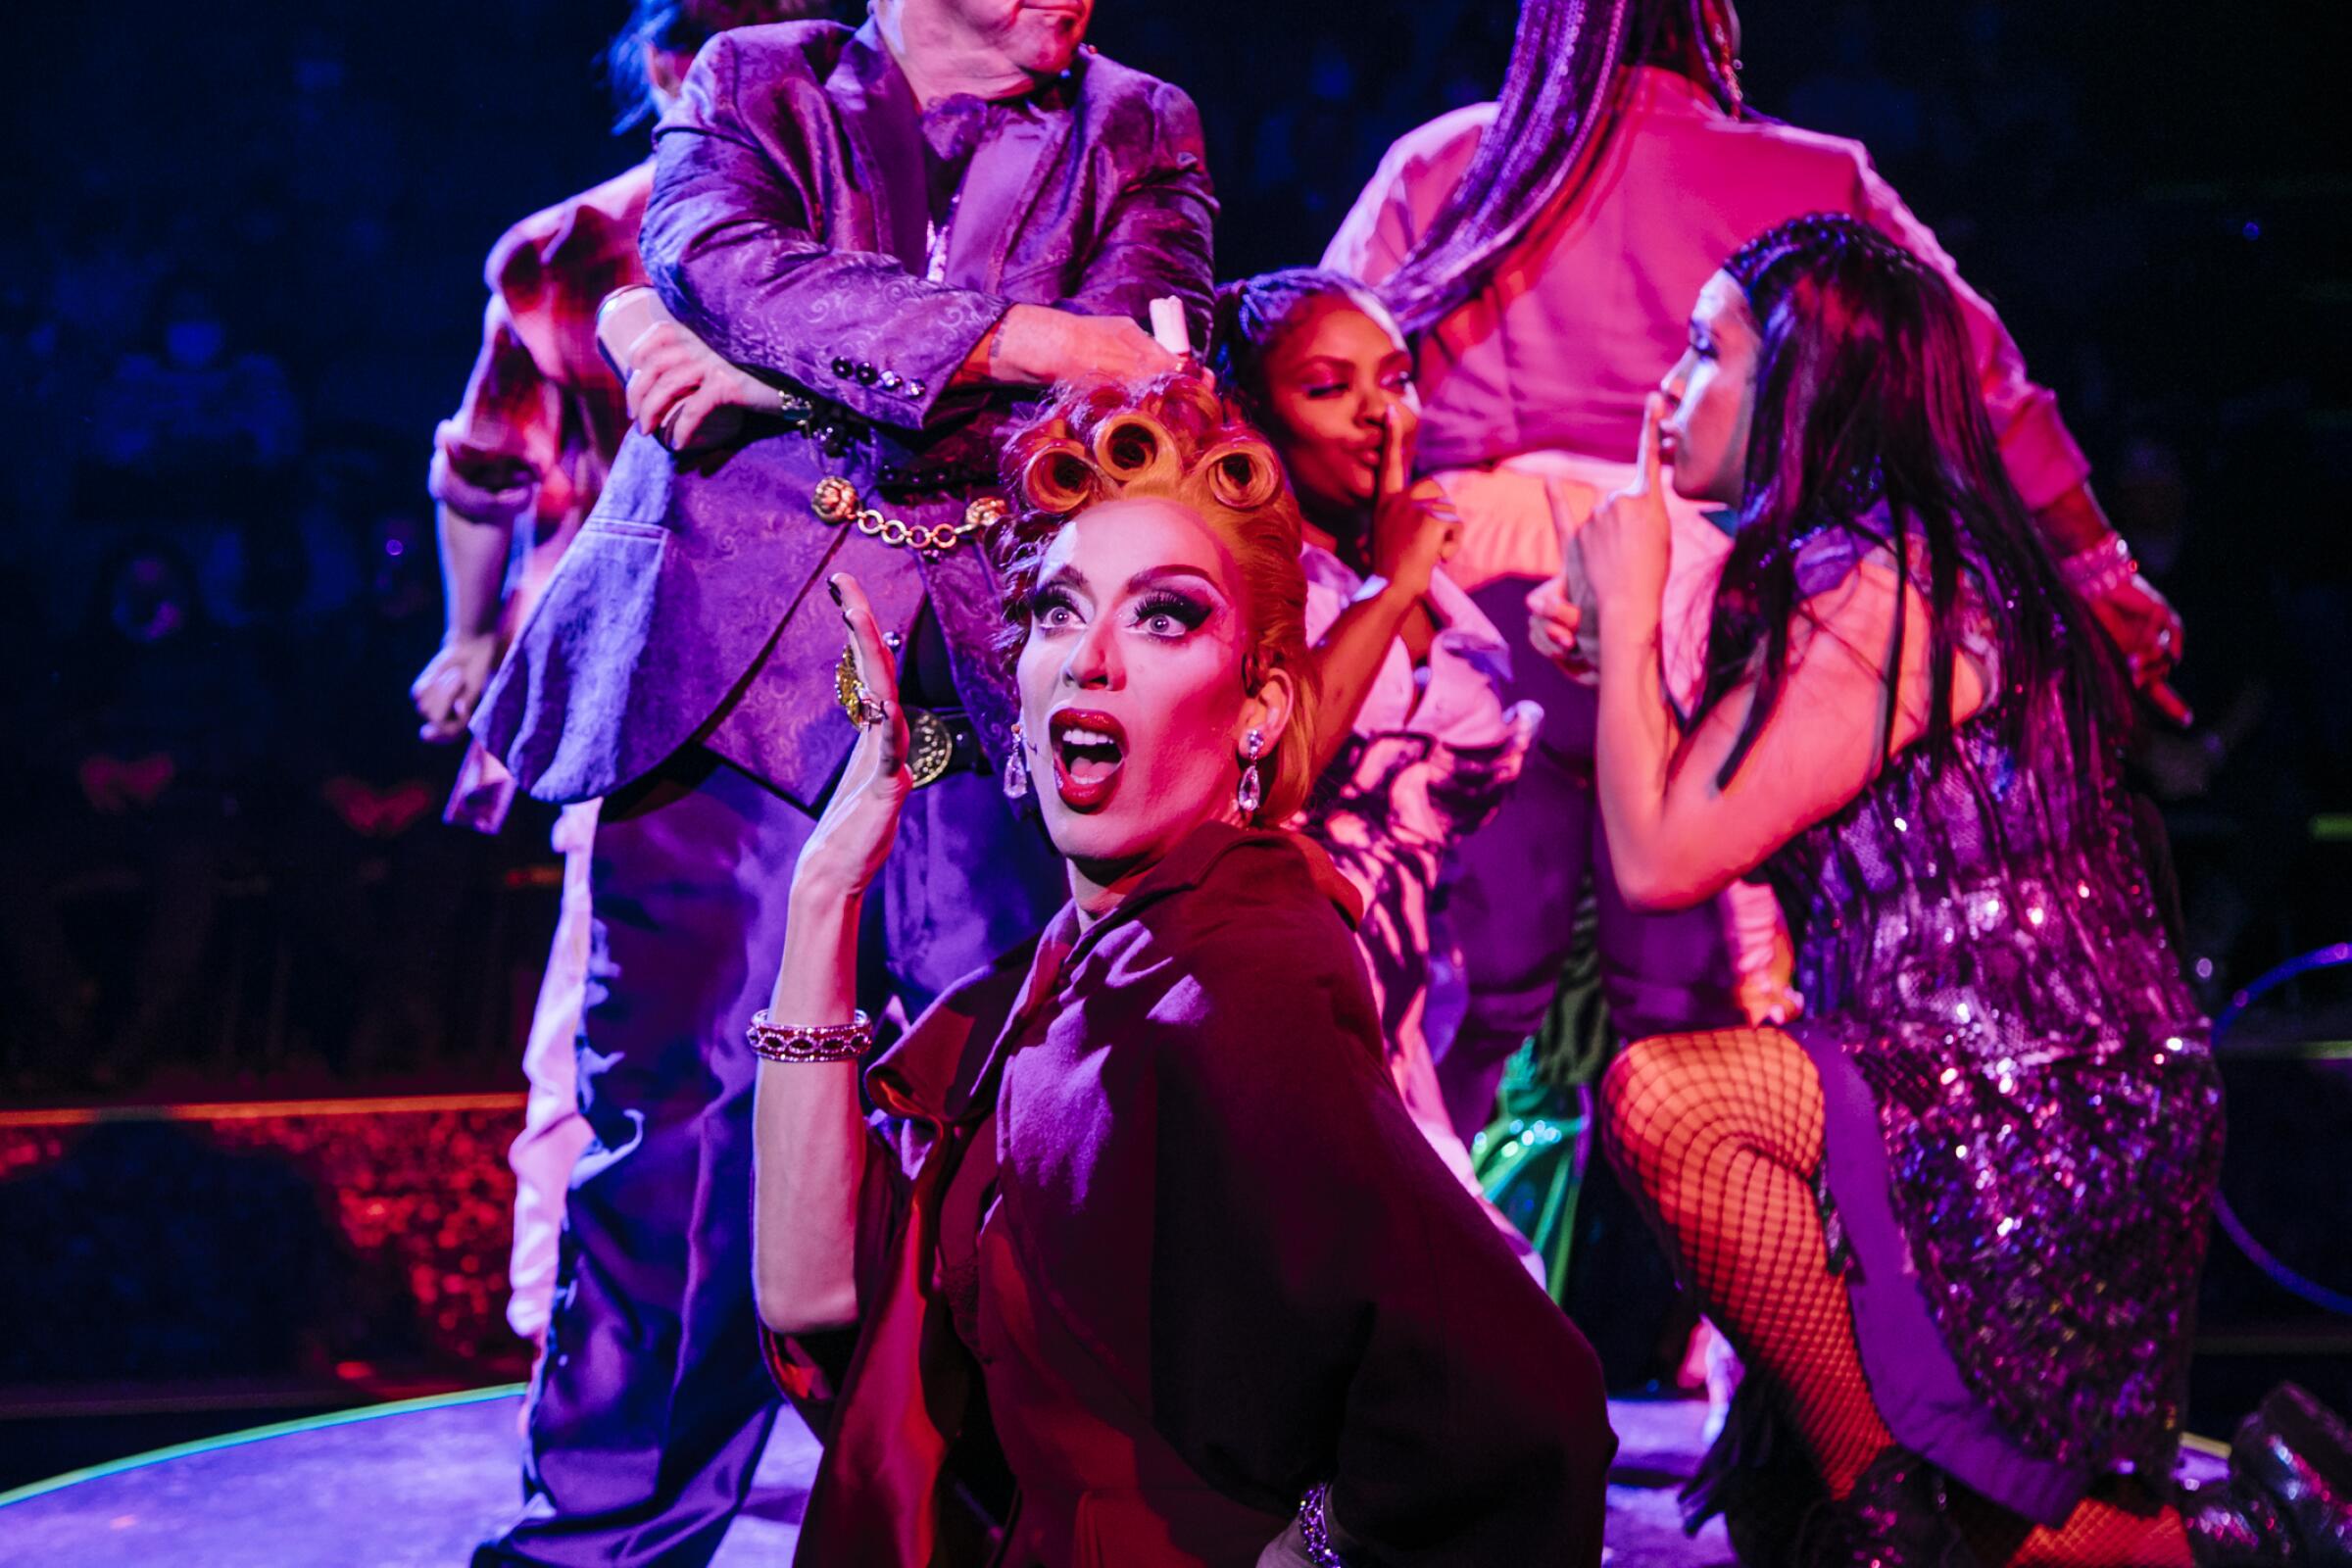 Alaska 5000 and the cast of "Head Over Heels" perform alongside the audience at the Pasadena Playhouse.